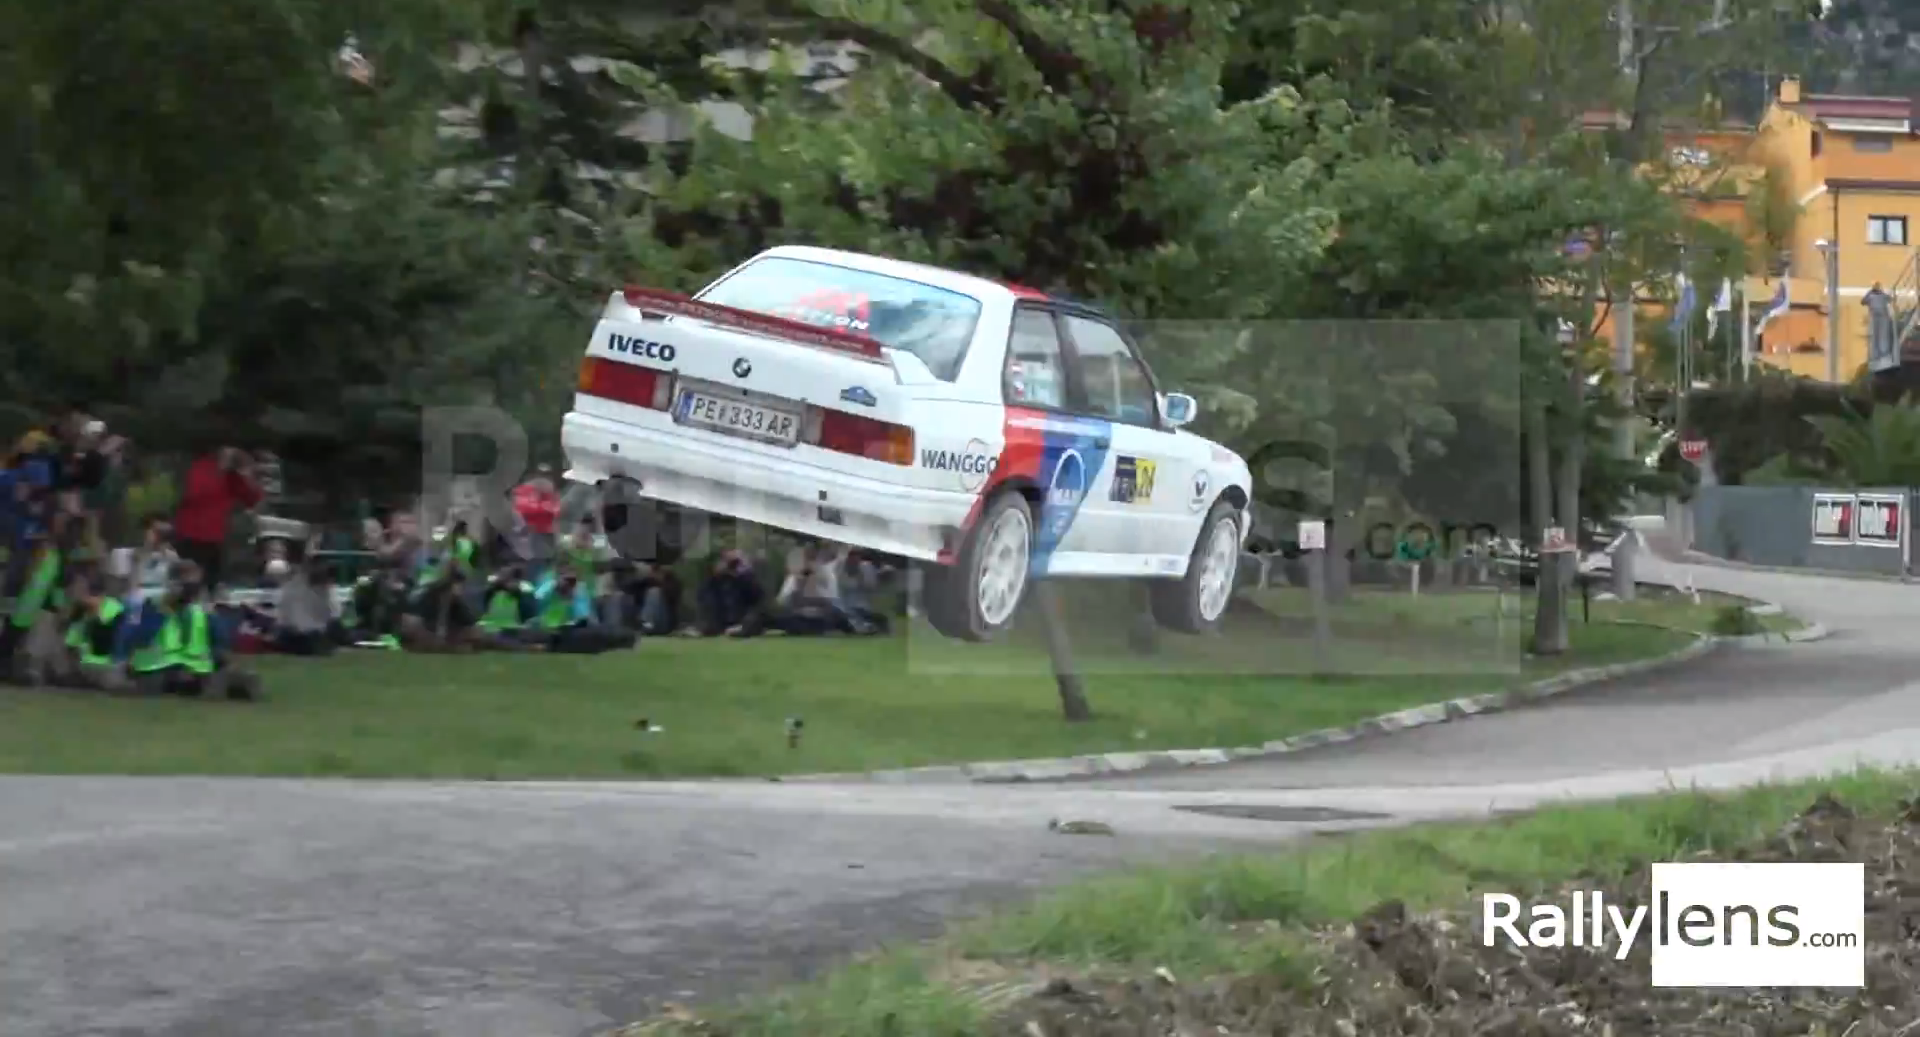 bmw-e30-m3-crashes-into-a-fence-during-rally-video-69405_1.png